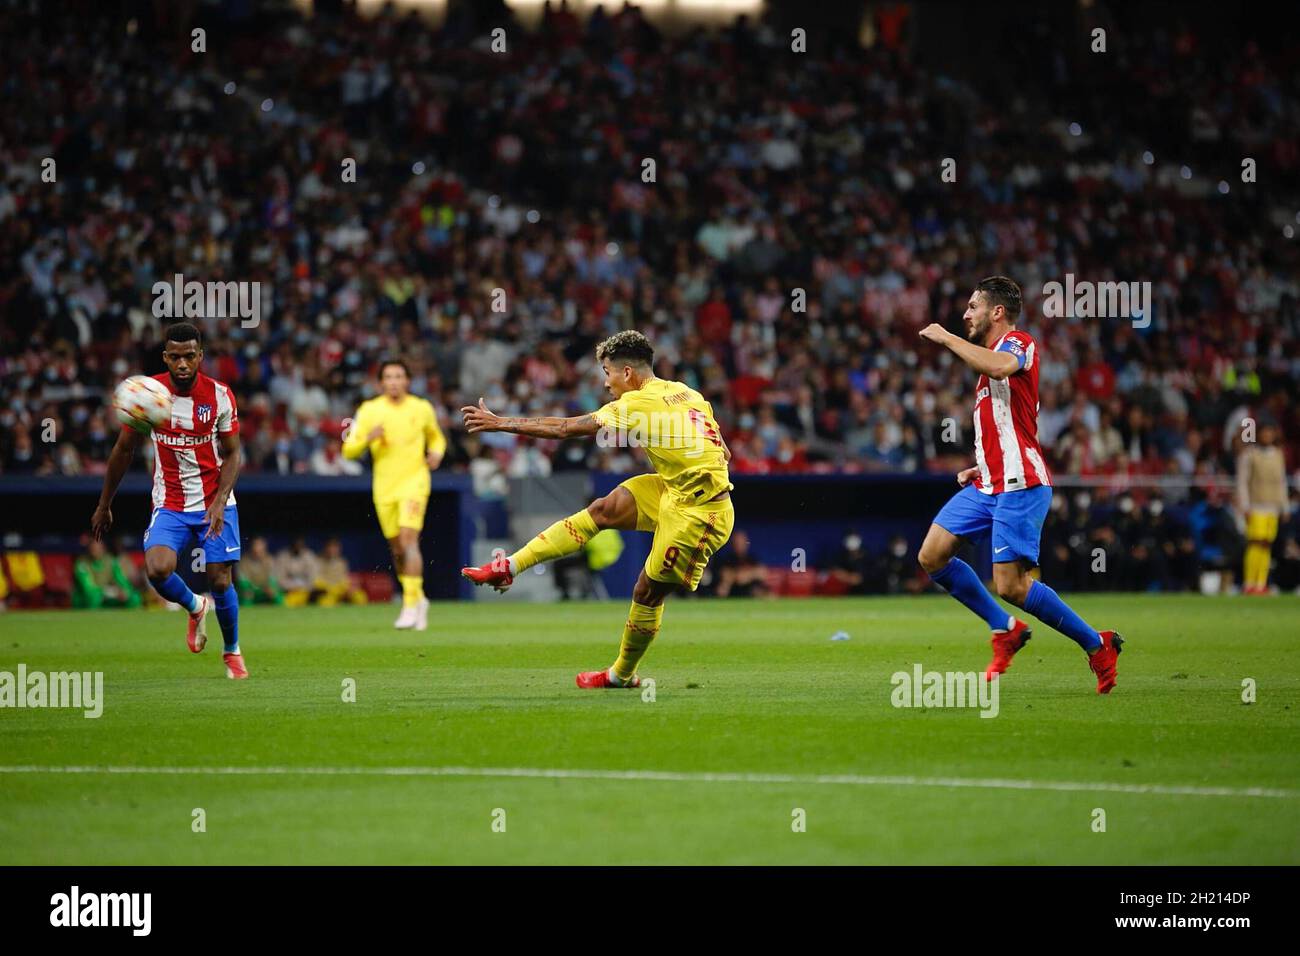 Madrid, Spain. 19th Oct, 2021. Mane from Liverpool FC, during UEFA Champions League Group stage agains Atletico de Madrid at the Wanda Metropolitano stadium. (Photo by: Ivan Abanades Medina Credit: CORDON PRESS/Alamy Live News Stock Photo